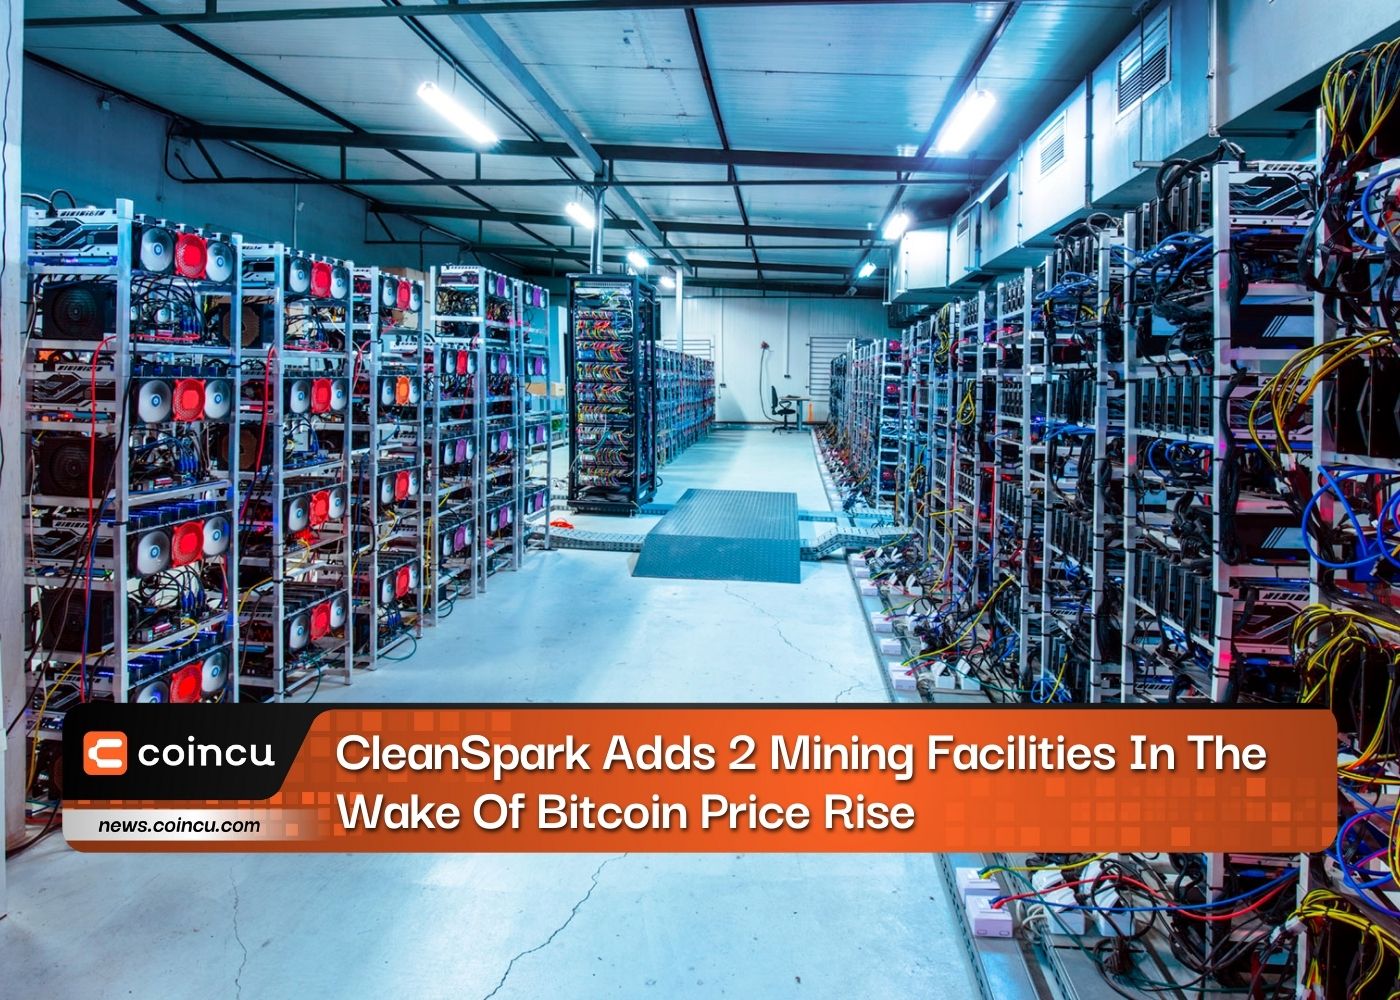 CleanSpark Adds 2 Mining Facilities In The Wake Of Bitcoin Price Rise